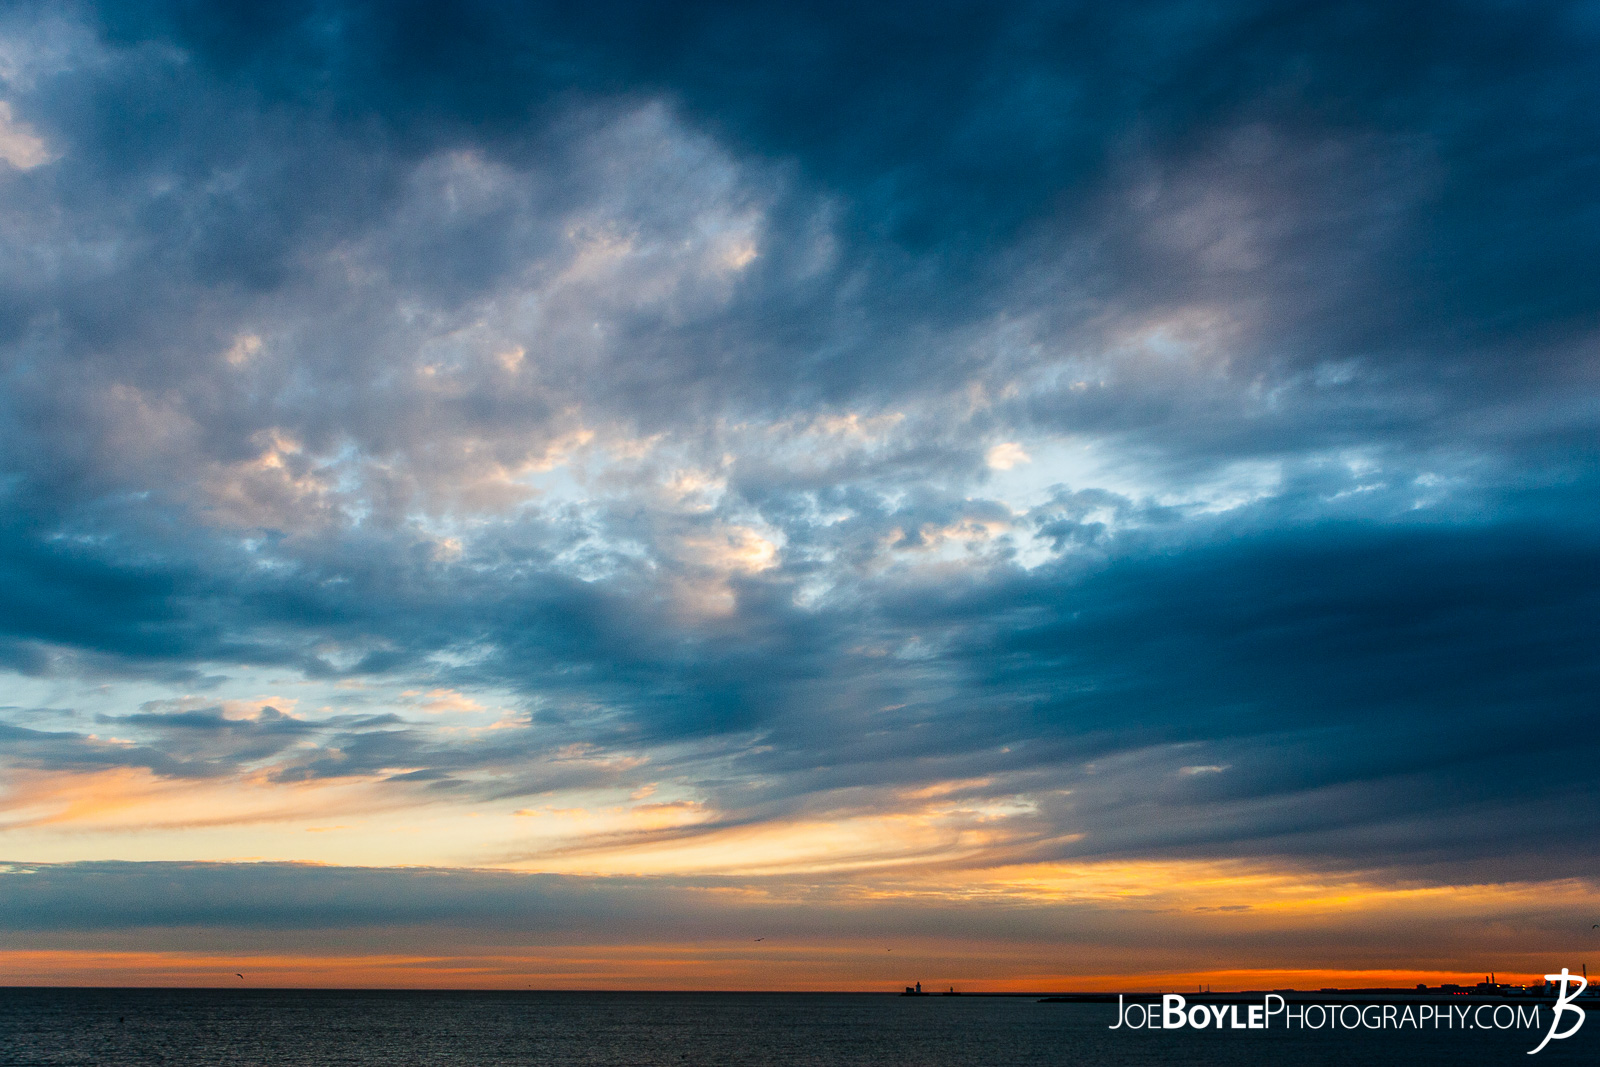  Here is a beautiful Cleveland Sunrise taken from Edgewater Park over Lake Erie with majestic clouds. 